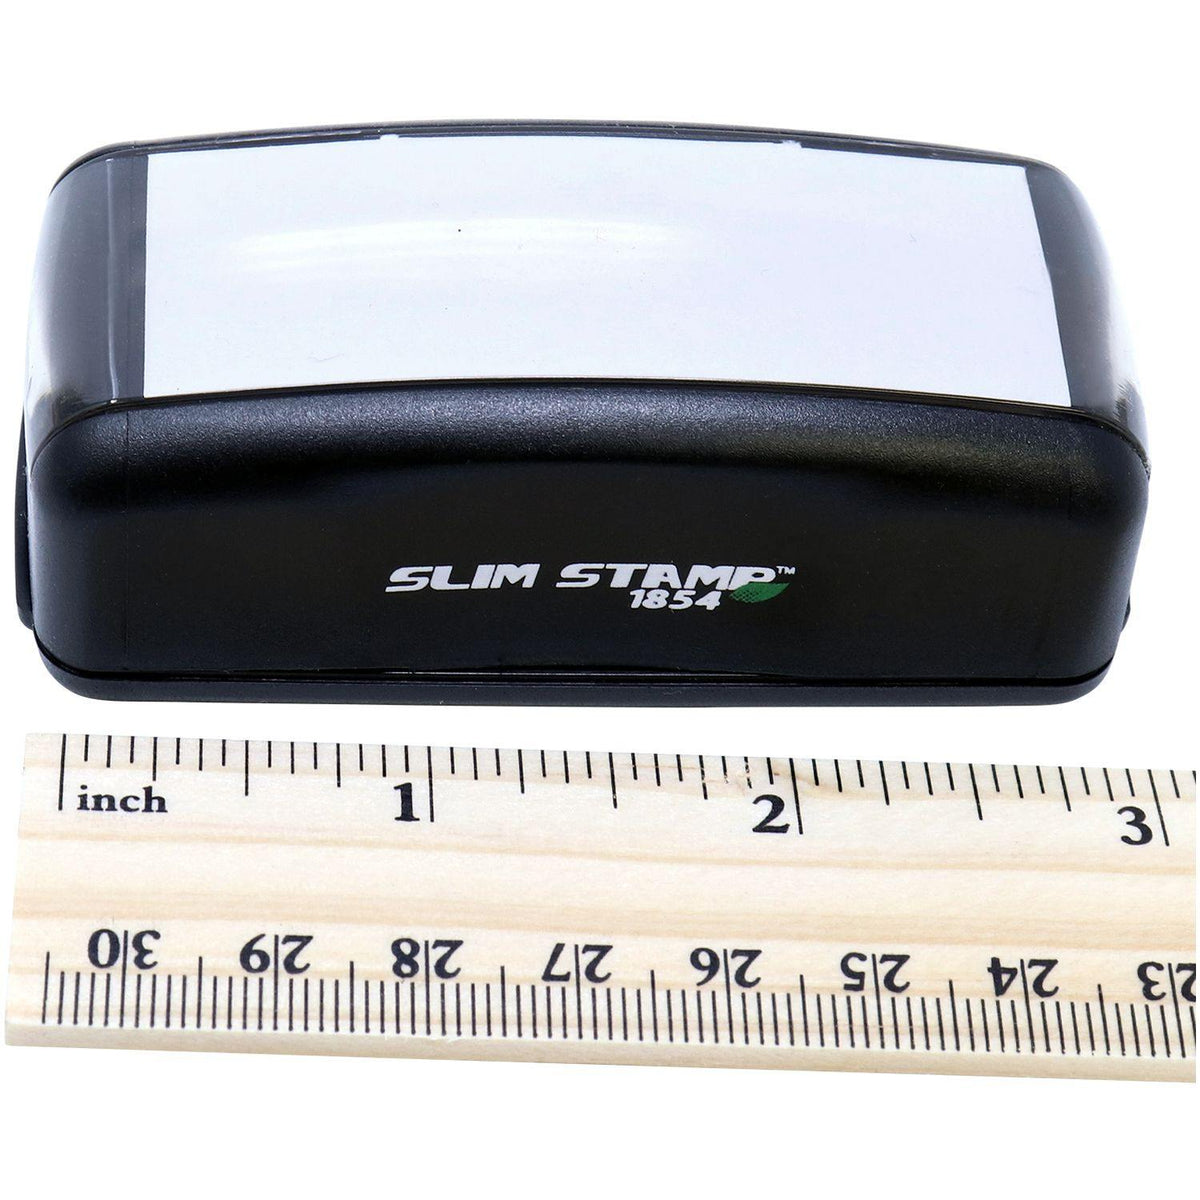 Measurement Large Pre-Inked Archivado Stamp with Ruler